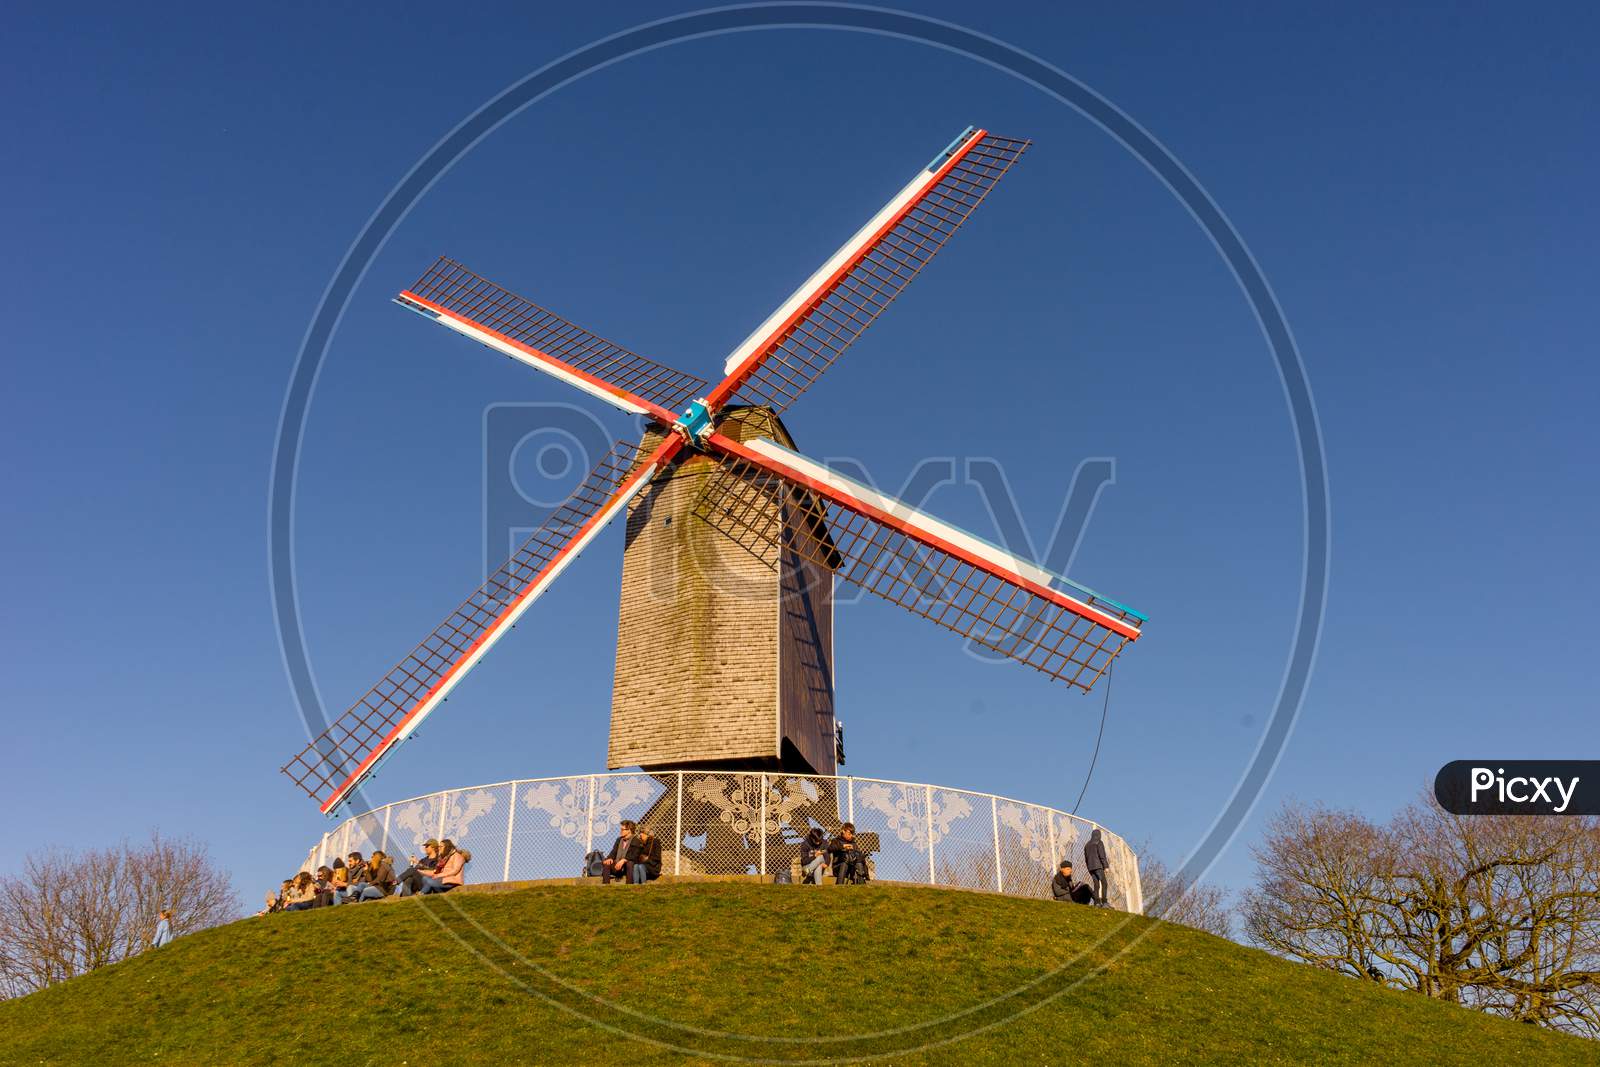 Belgium, Bruges, A Windmill On Top Of A Grass Covered Field